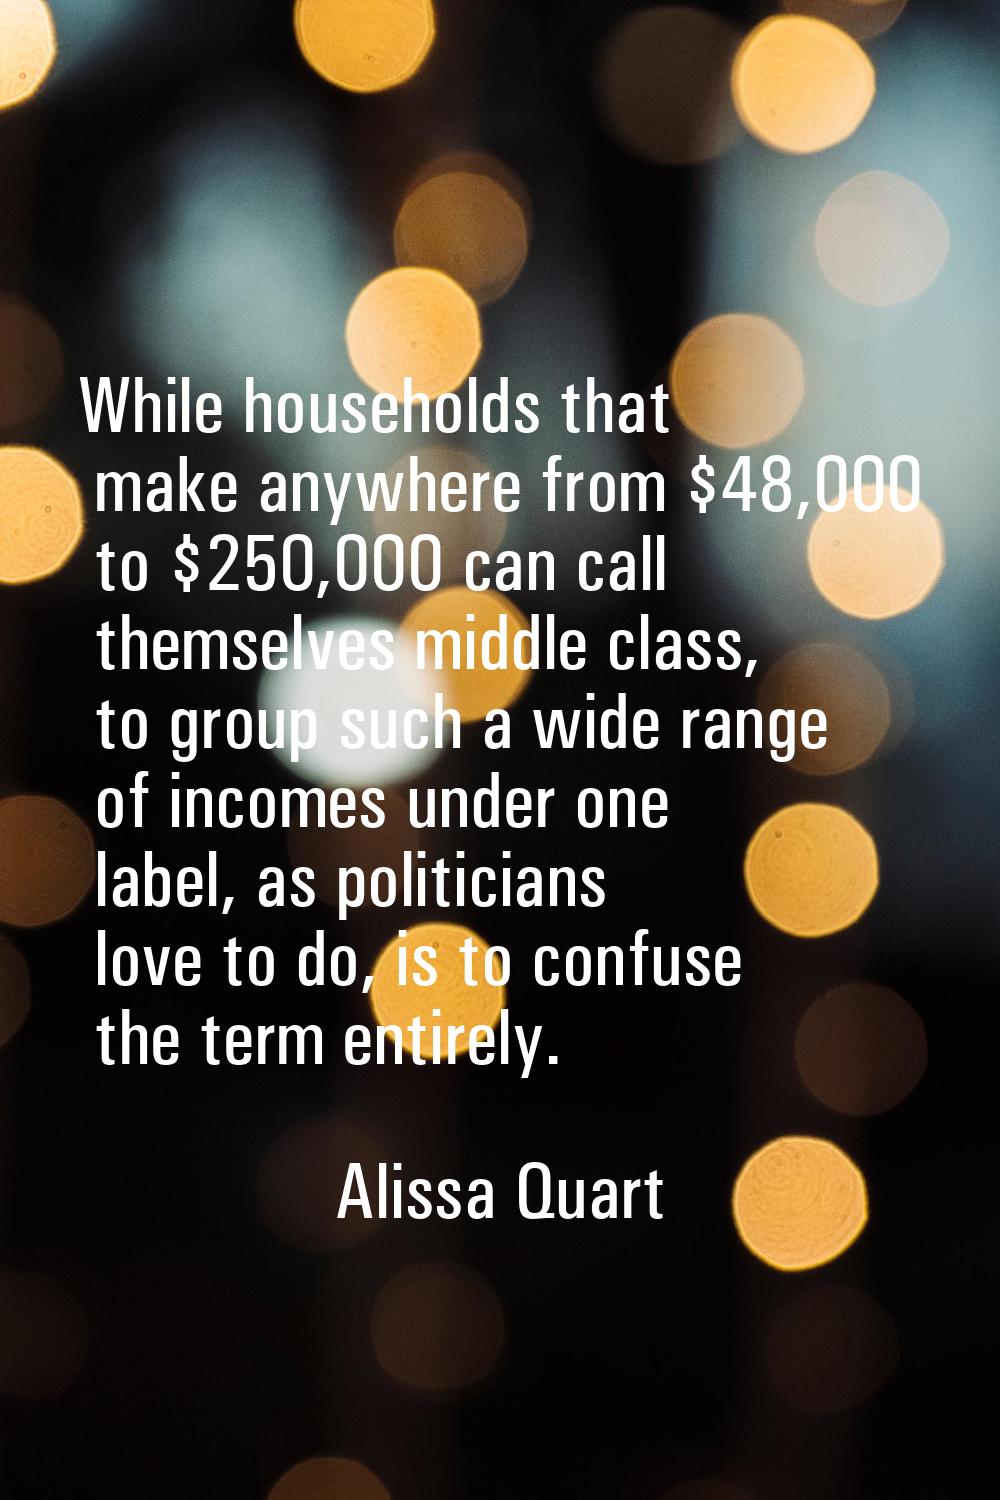 While households that make anywhere from $48,000 to $250,000 can call themselves middle class, to g